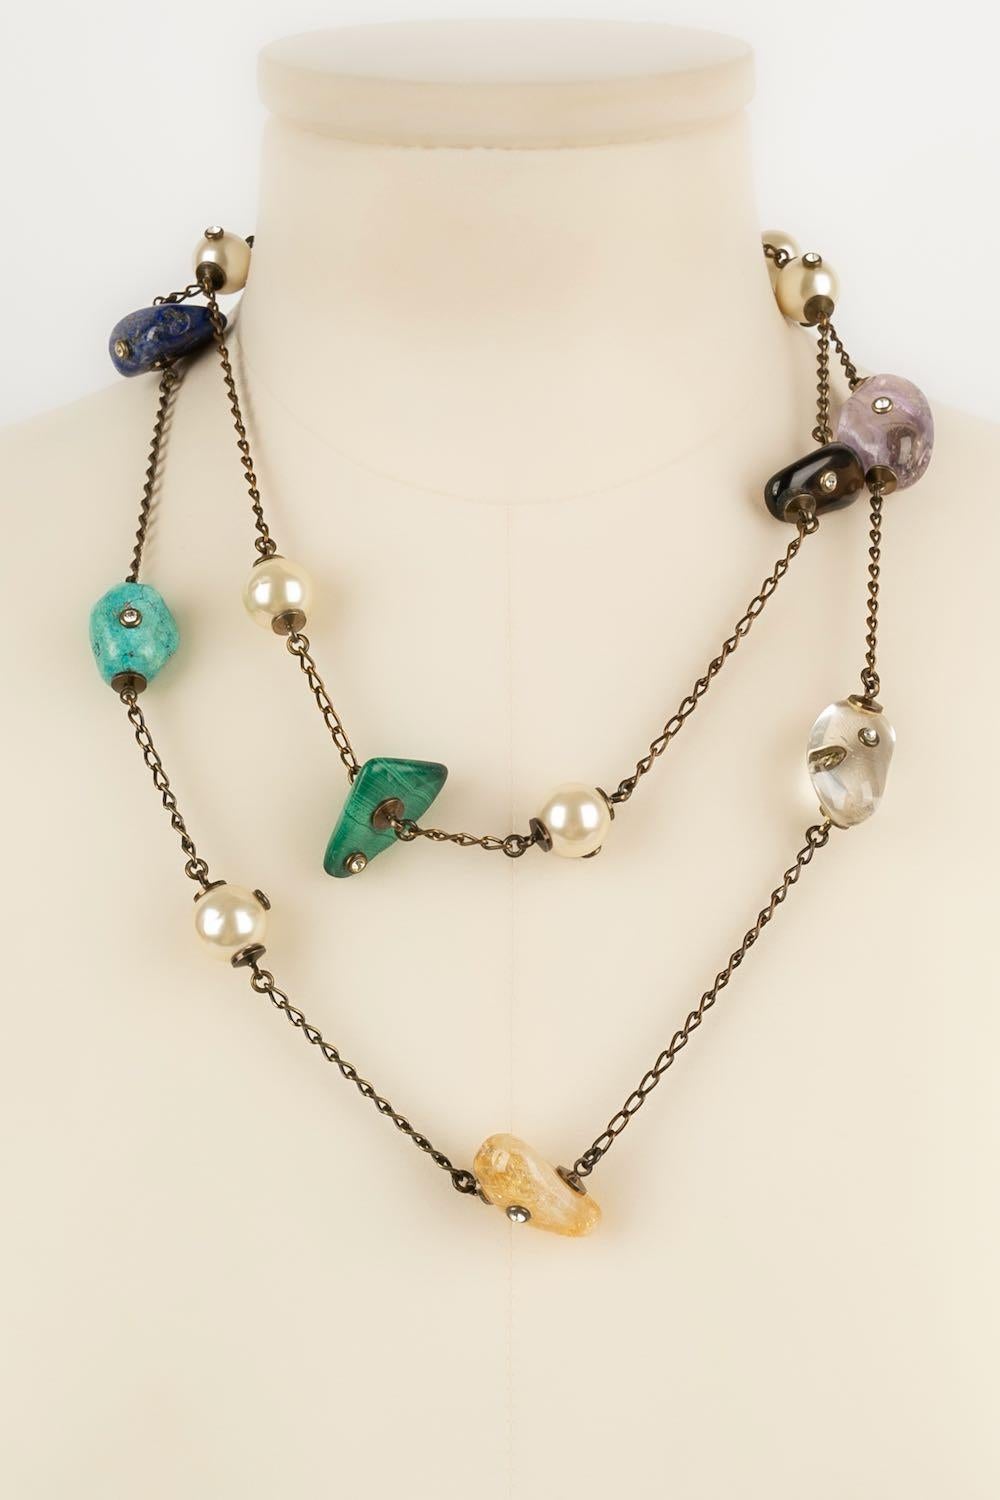 Women's Chanel Necklace in Copper Plated Metal and Hard Stone Beads For Sale